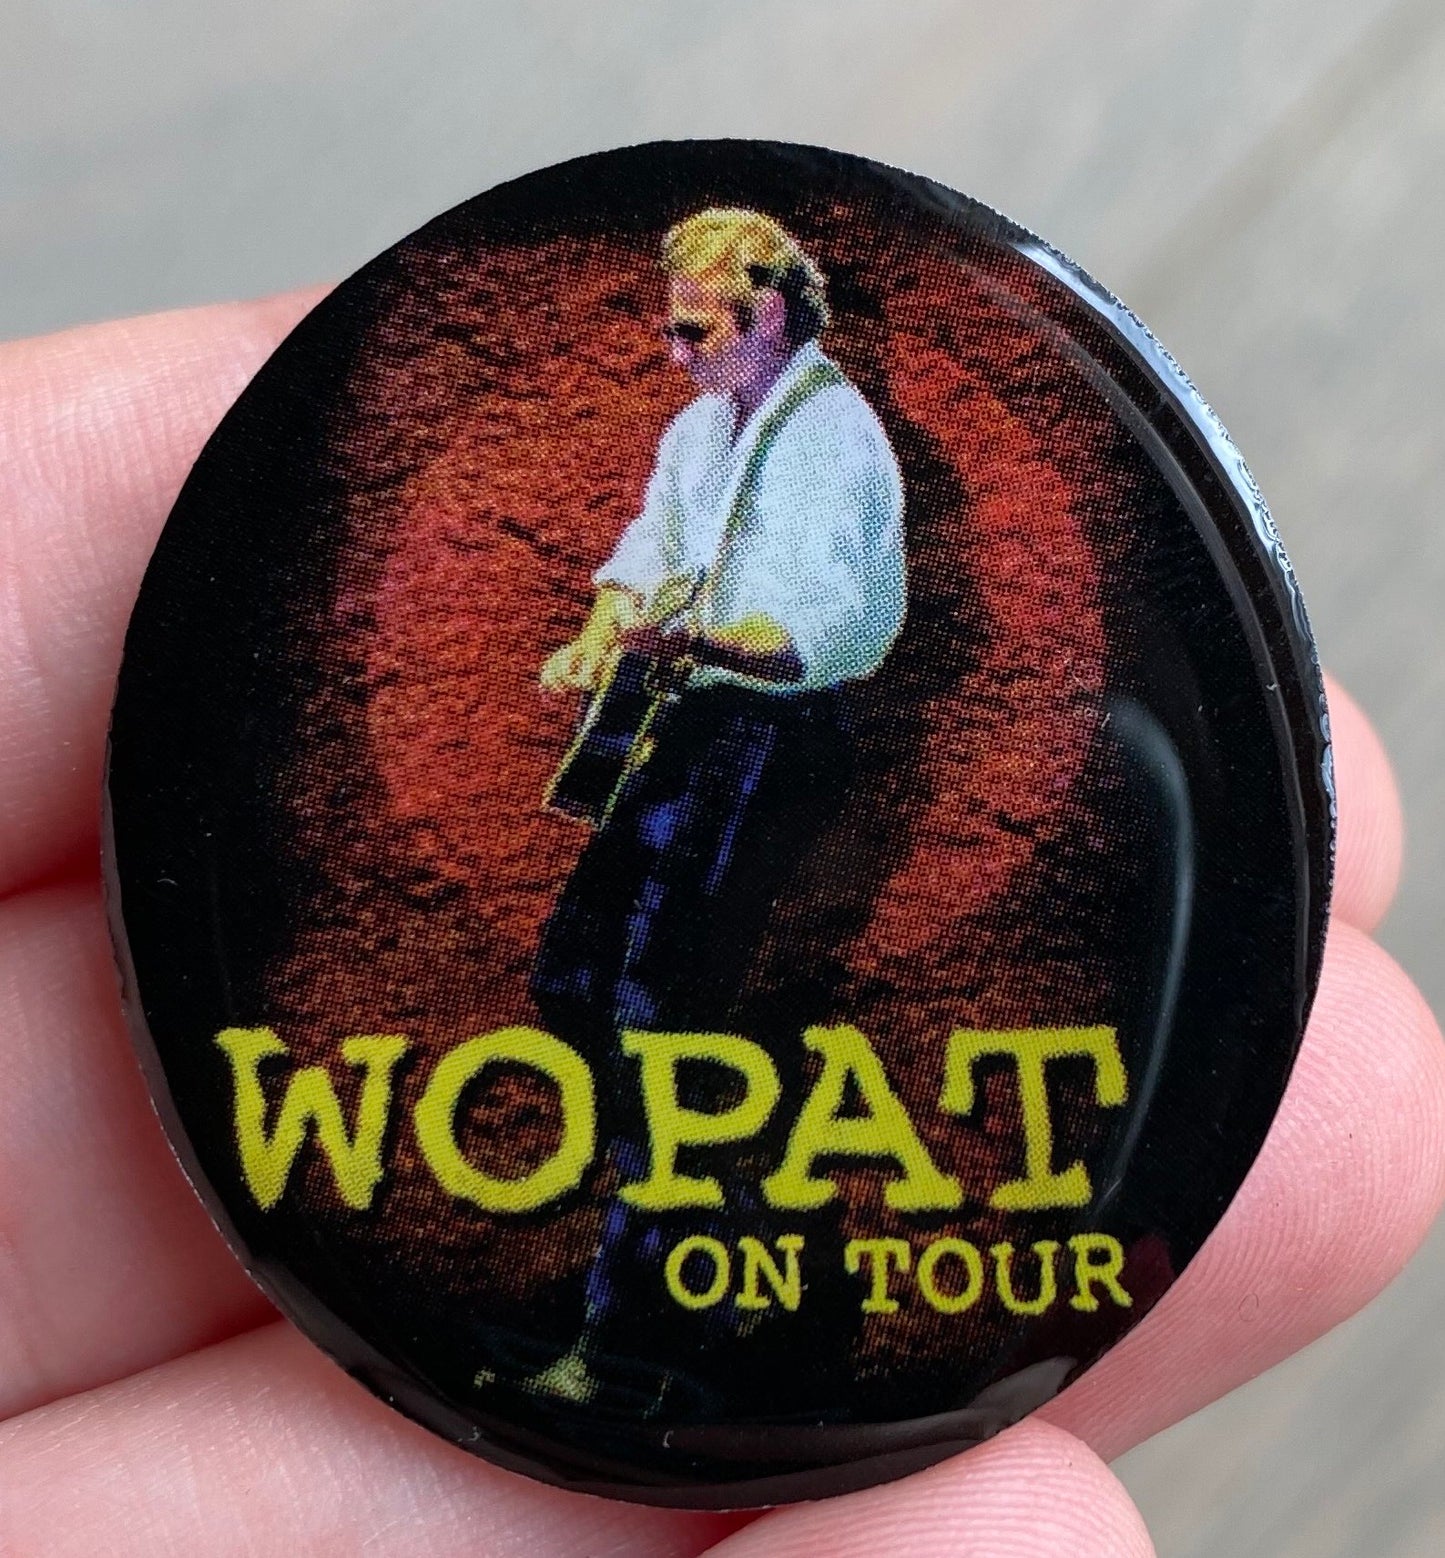 Tom Wopat Limited Edition Enamel Pin